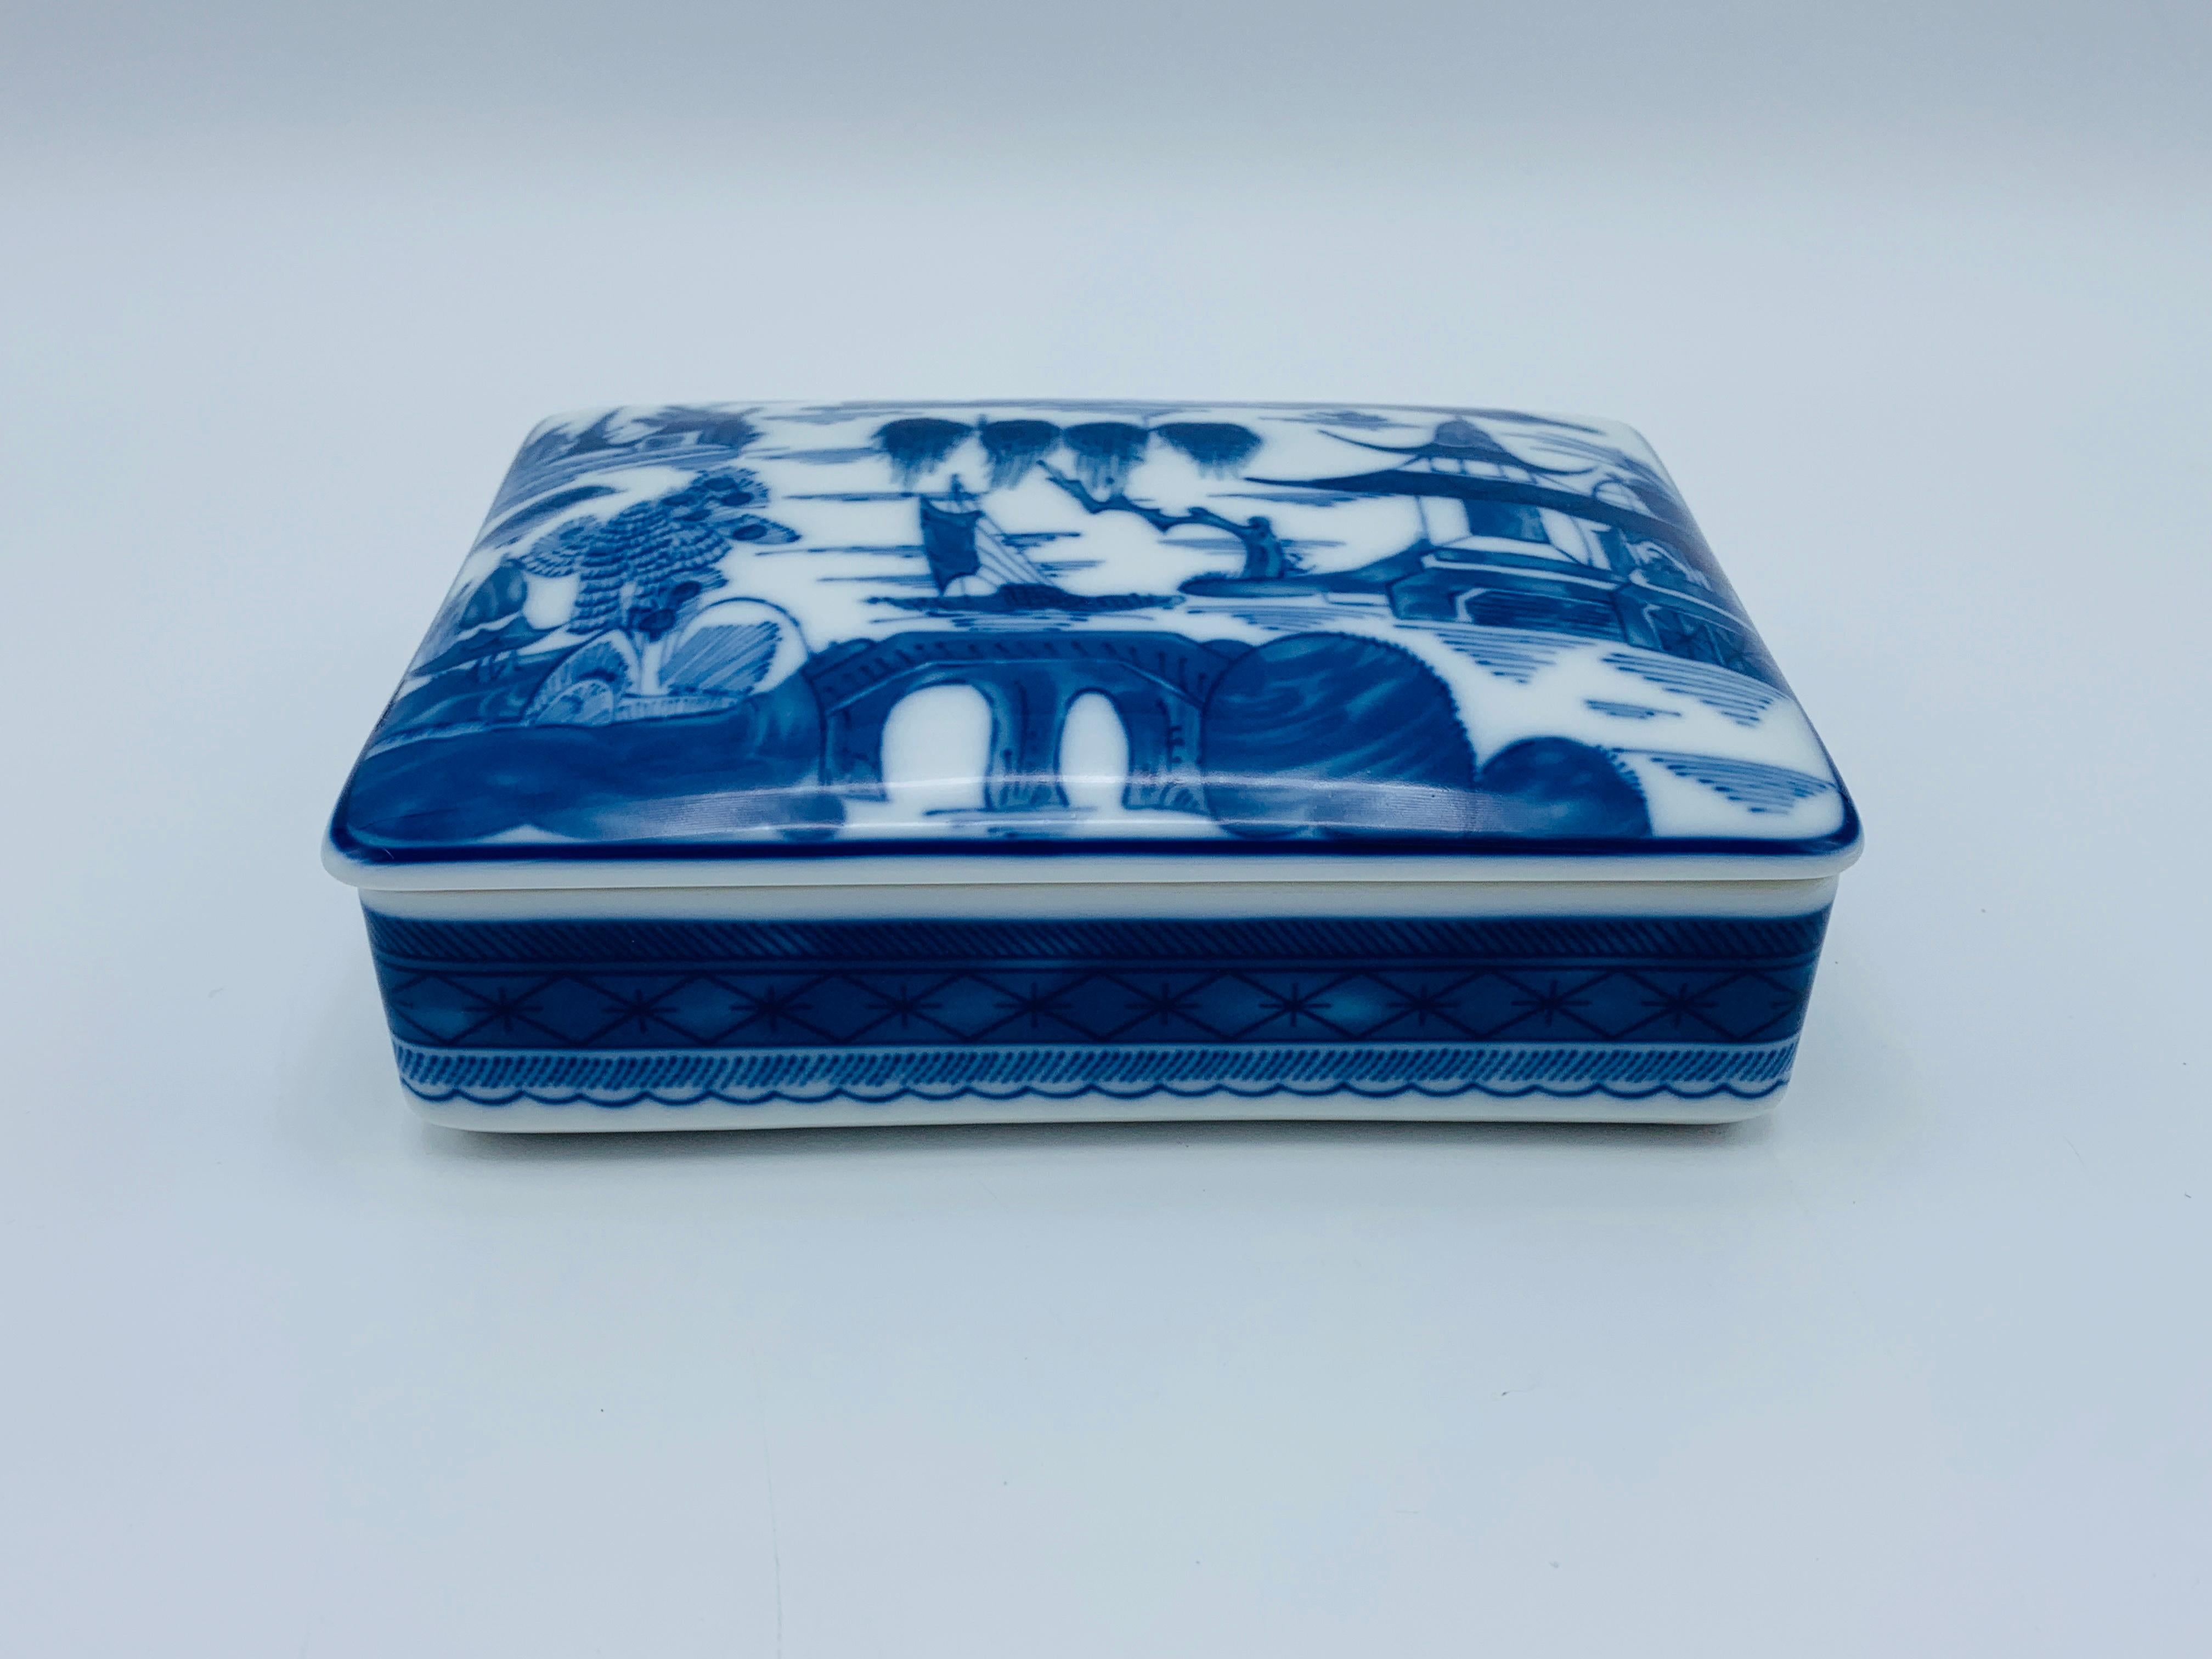 Listed is a beautiful, 1980s Mottahedeh 'Blue Canton' porcelain rectangular box. 'Blue Canton' is Mottahedeh's take on the historic and significantly known 'Blue Willow' pattern, originally created by Minton in 1910s. This piece is in exquisite